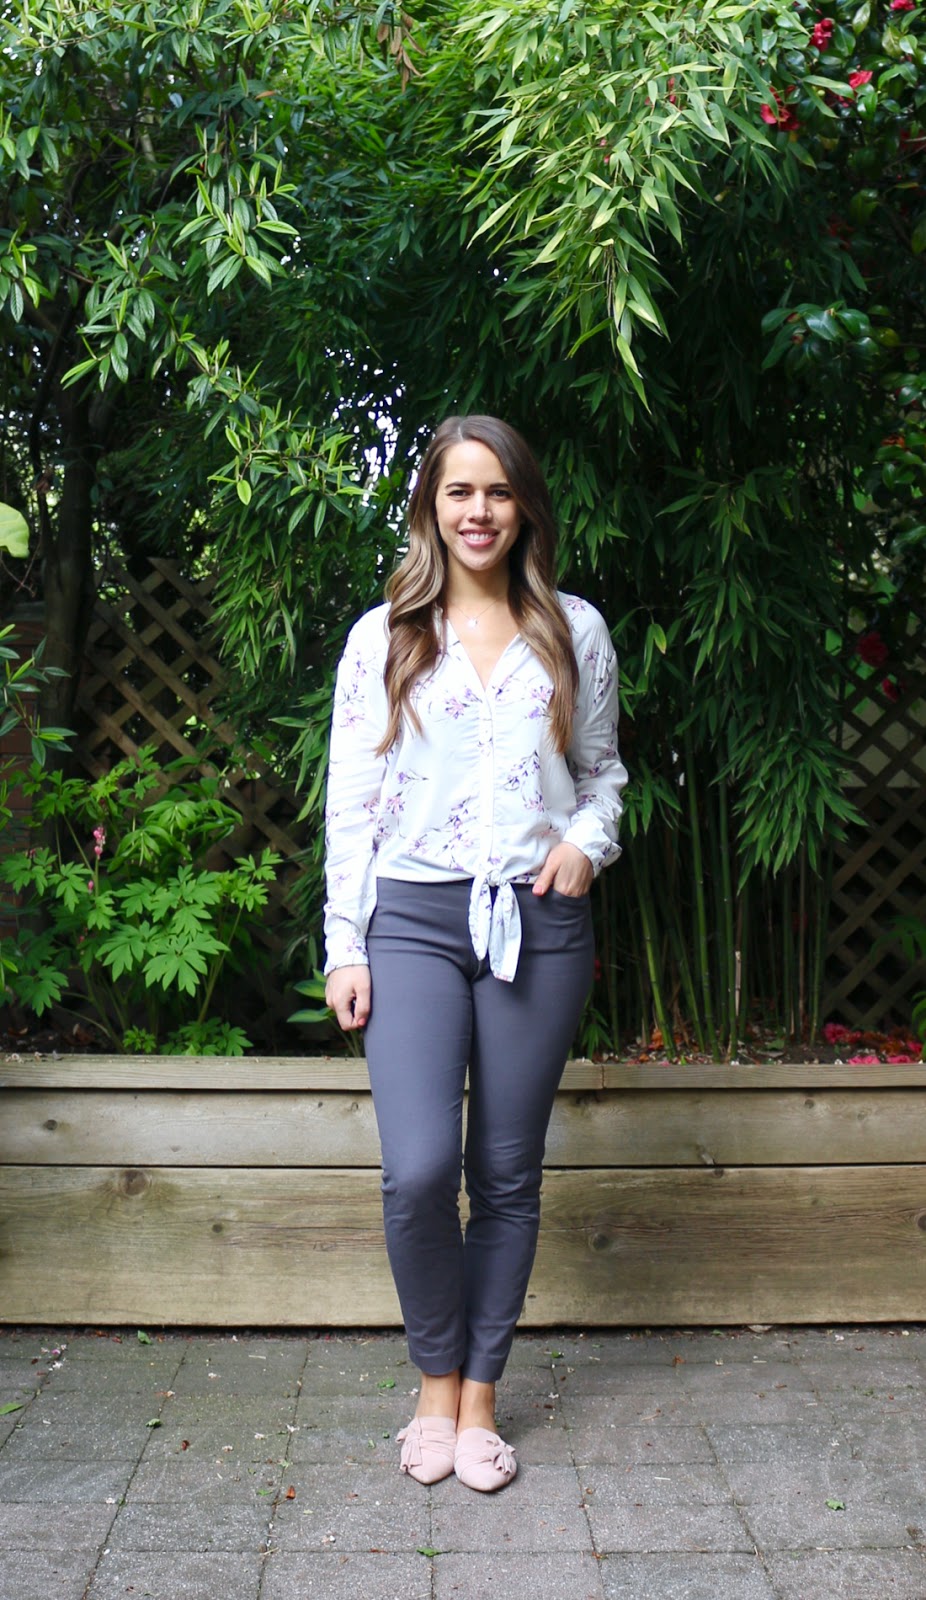 Jules in Flats - Floral Knot Front Blouse (Business Casual Spring Workwear on a Budget)